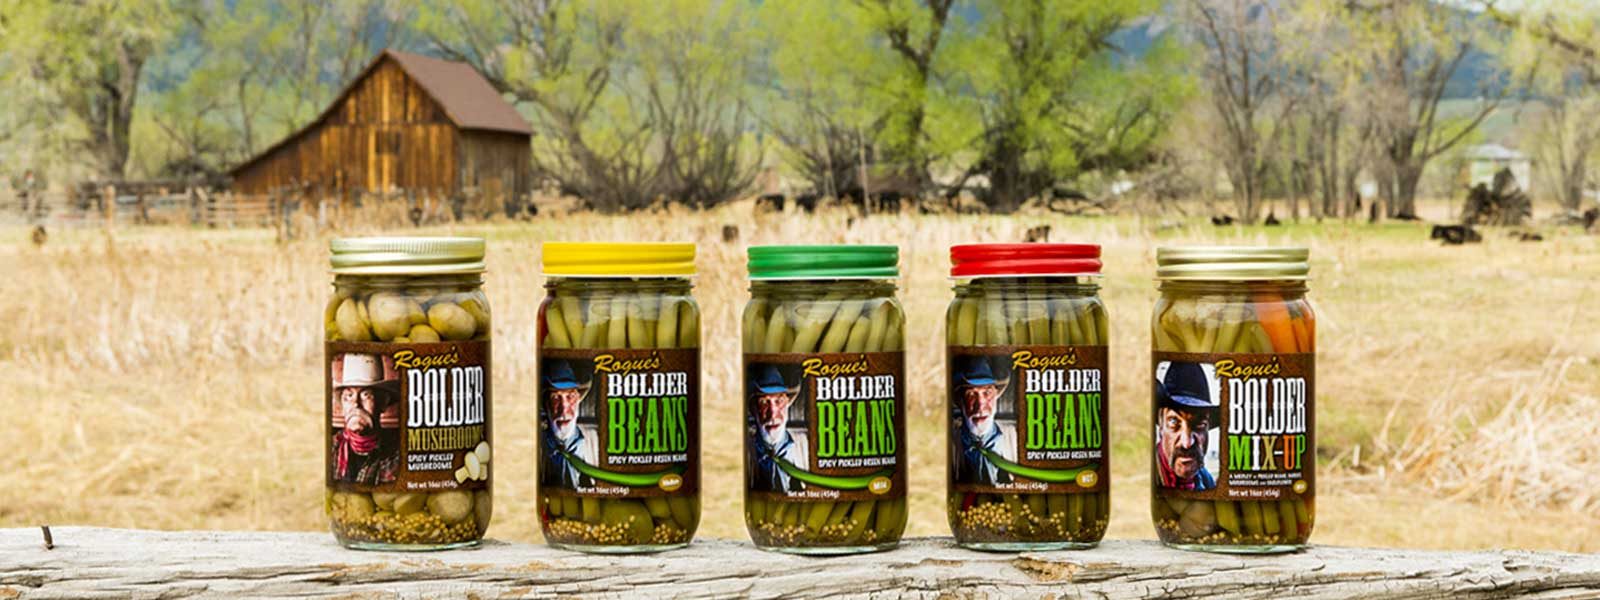 Photo of Bolder Beans product family on a split fence rail